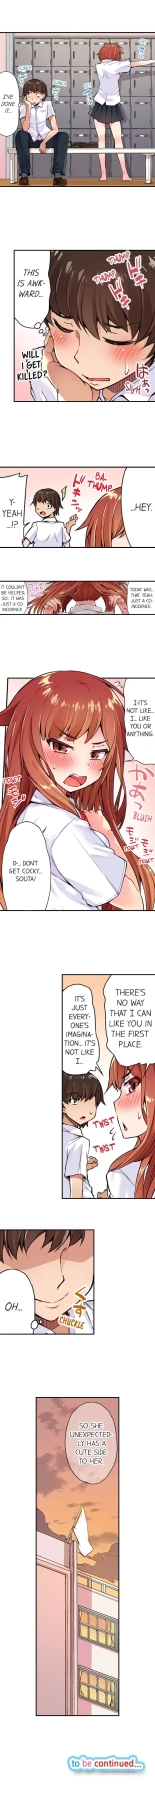 Traditional Job of Washing Girls' Body Ch. 1-181 : page 82